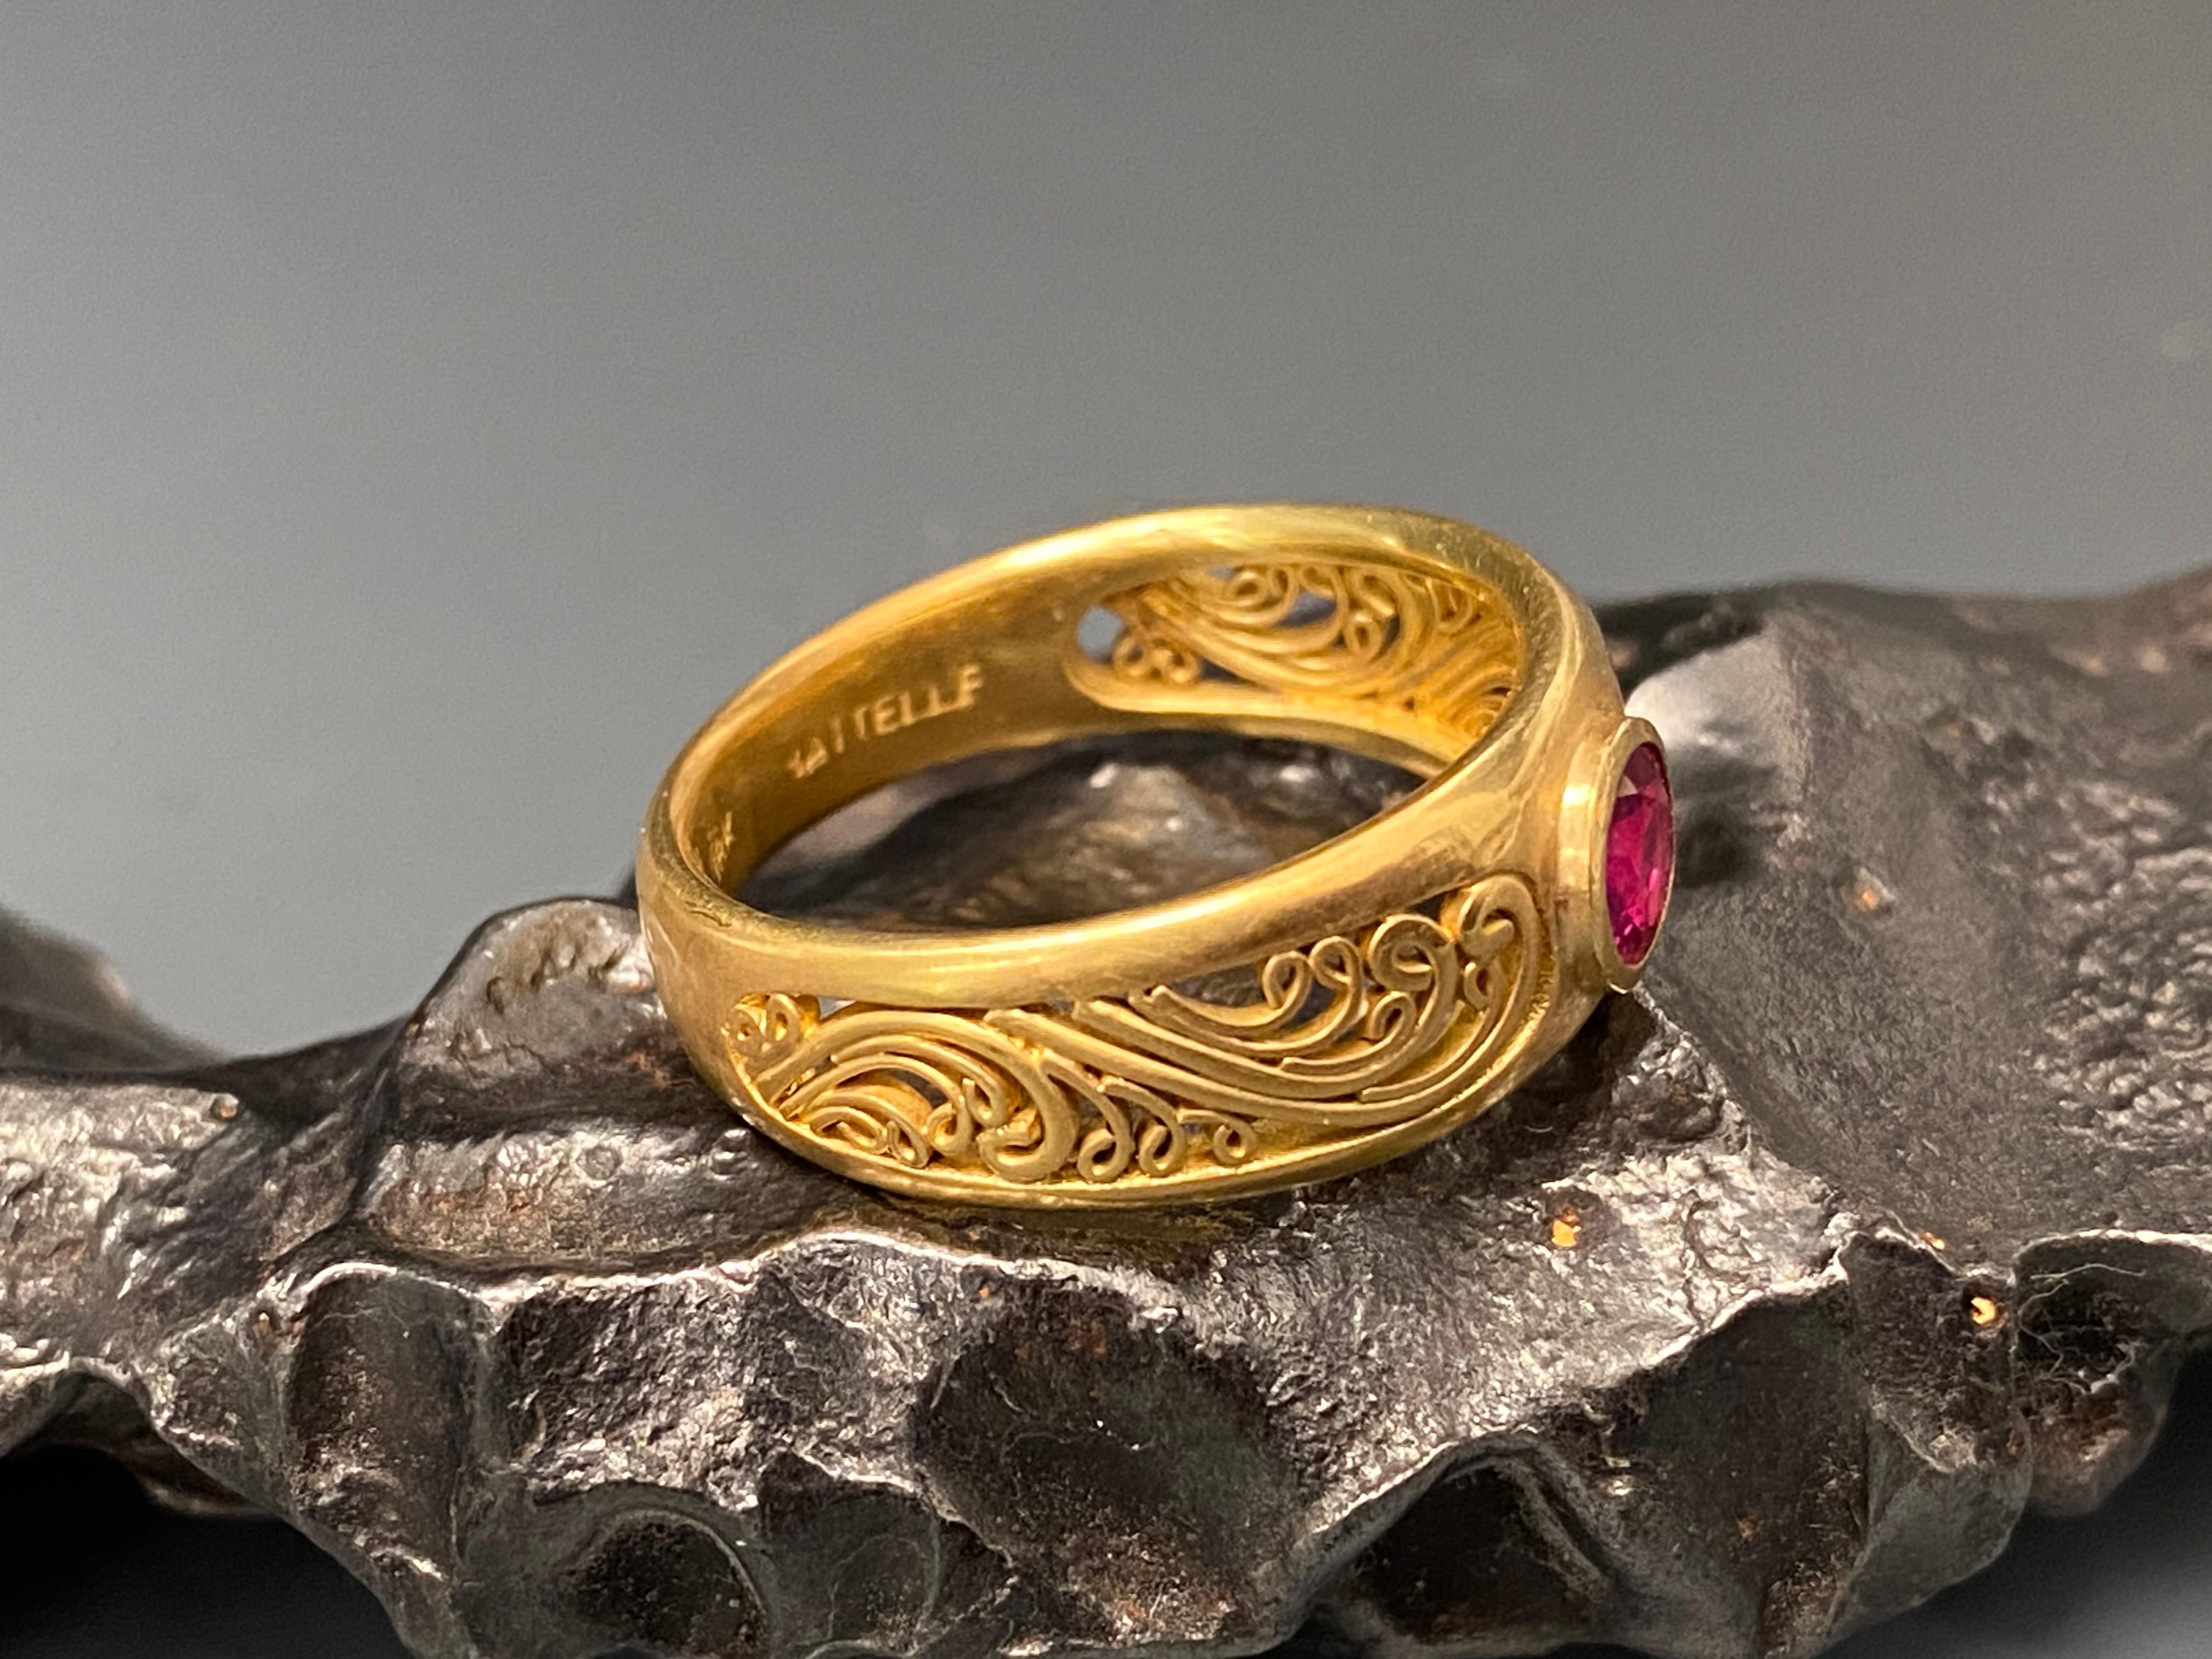 A substantial and comfortable gapped 18K gold shank is inset with fine handset scroll wire work on both sides of its central 5mm round faceted pink Thailand ruby in this design.  A nice juxtaposition stone and motif.  This ring is currently sized 7.